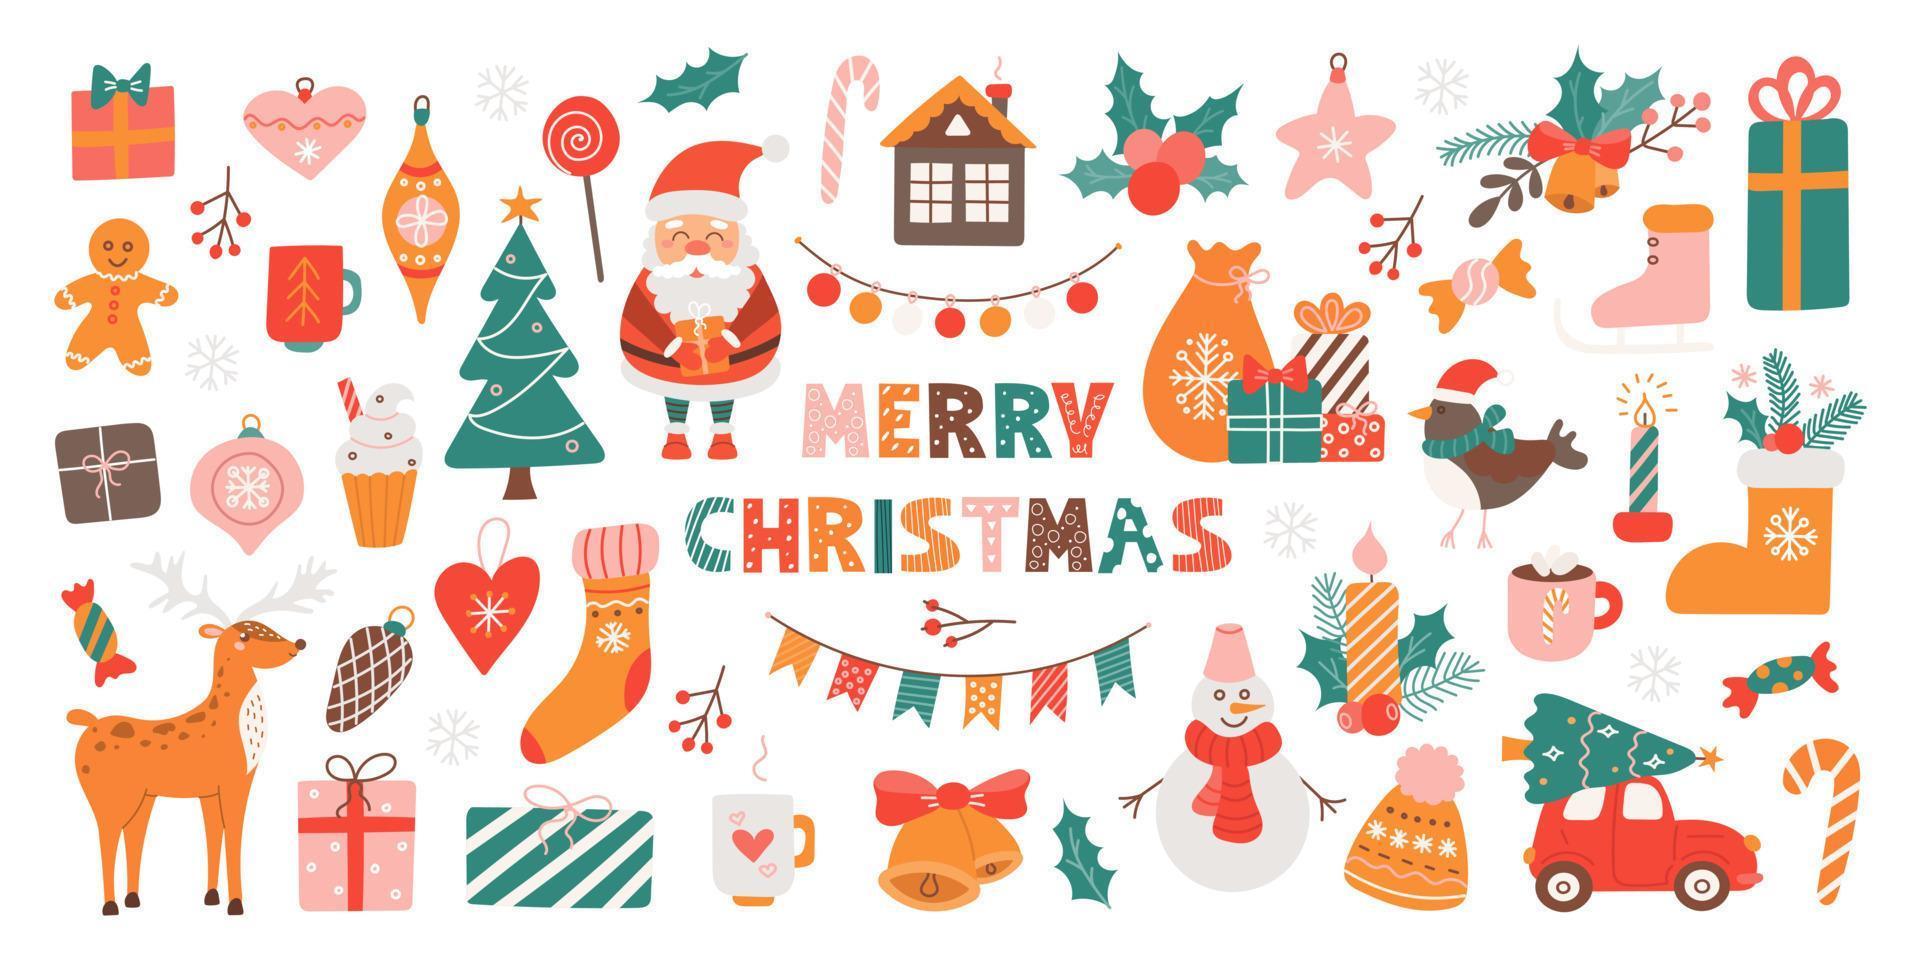 Big Christmas set of festive symbols and design elements. Cute flat illustration in hand drawn style on white background vector